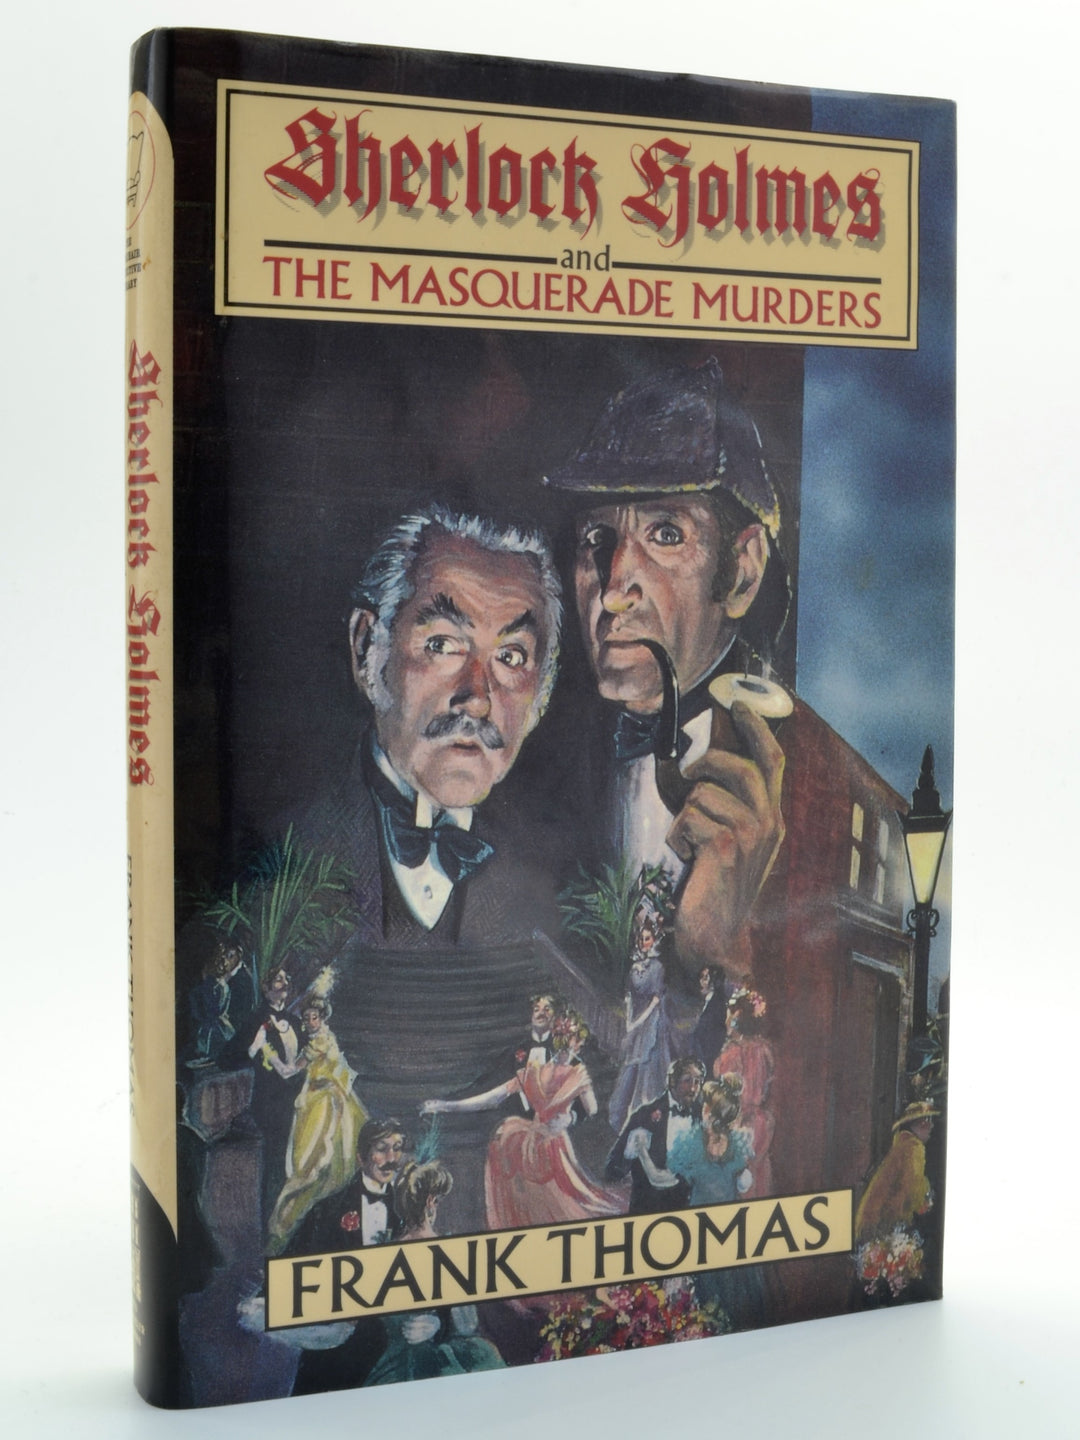 Thomas, Frank - Sherlock Holmes and the Masquerade Murders | back cover